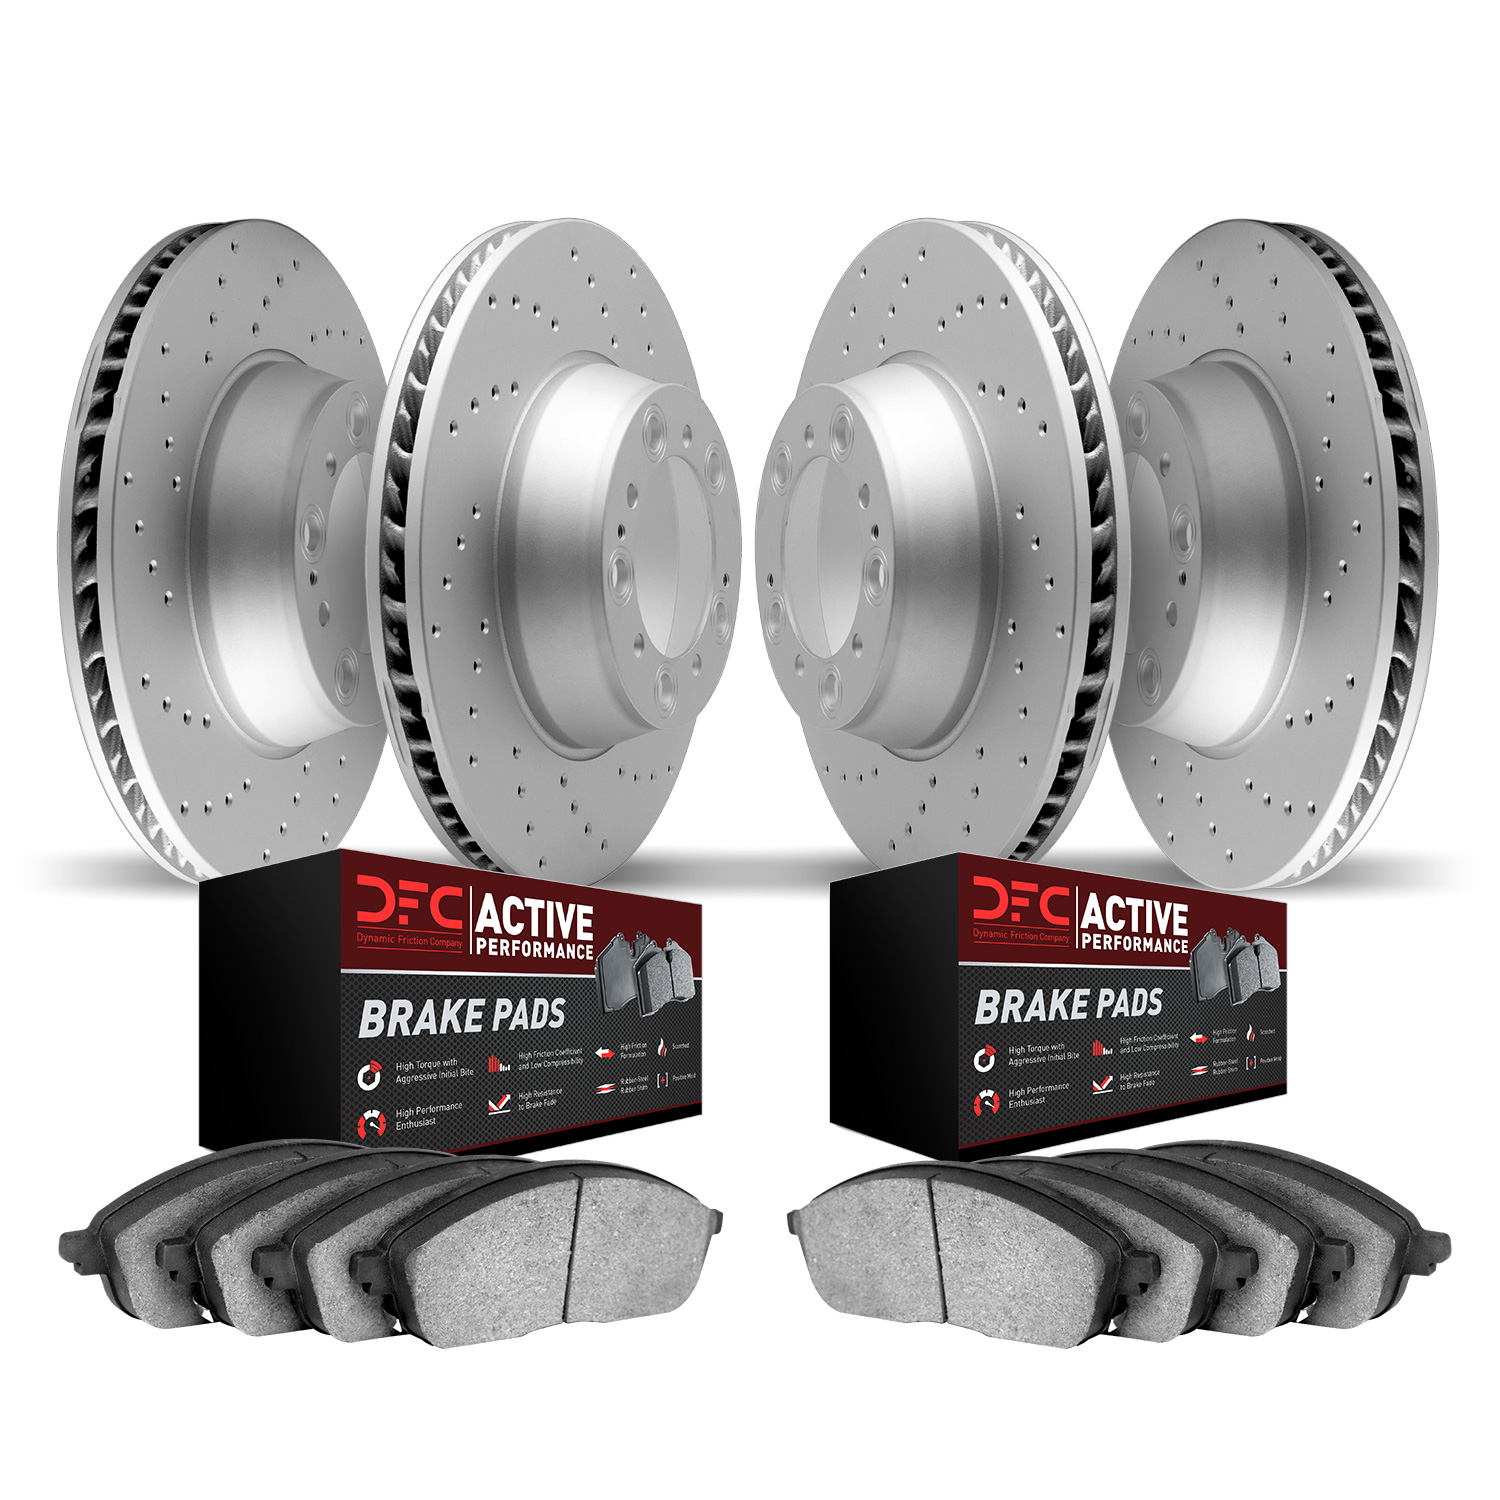 2704-31096 Geoperformance Drilled Brake Rotors with Active Performance Pads Kit, 2008-2013 BMW, Position: Front and Rear